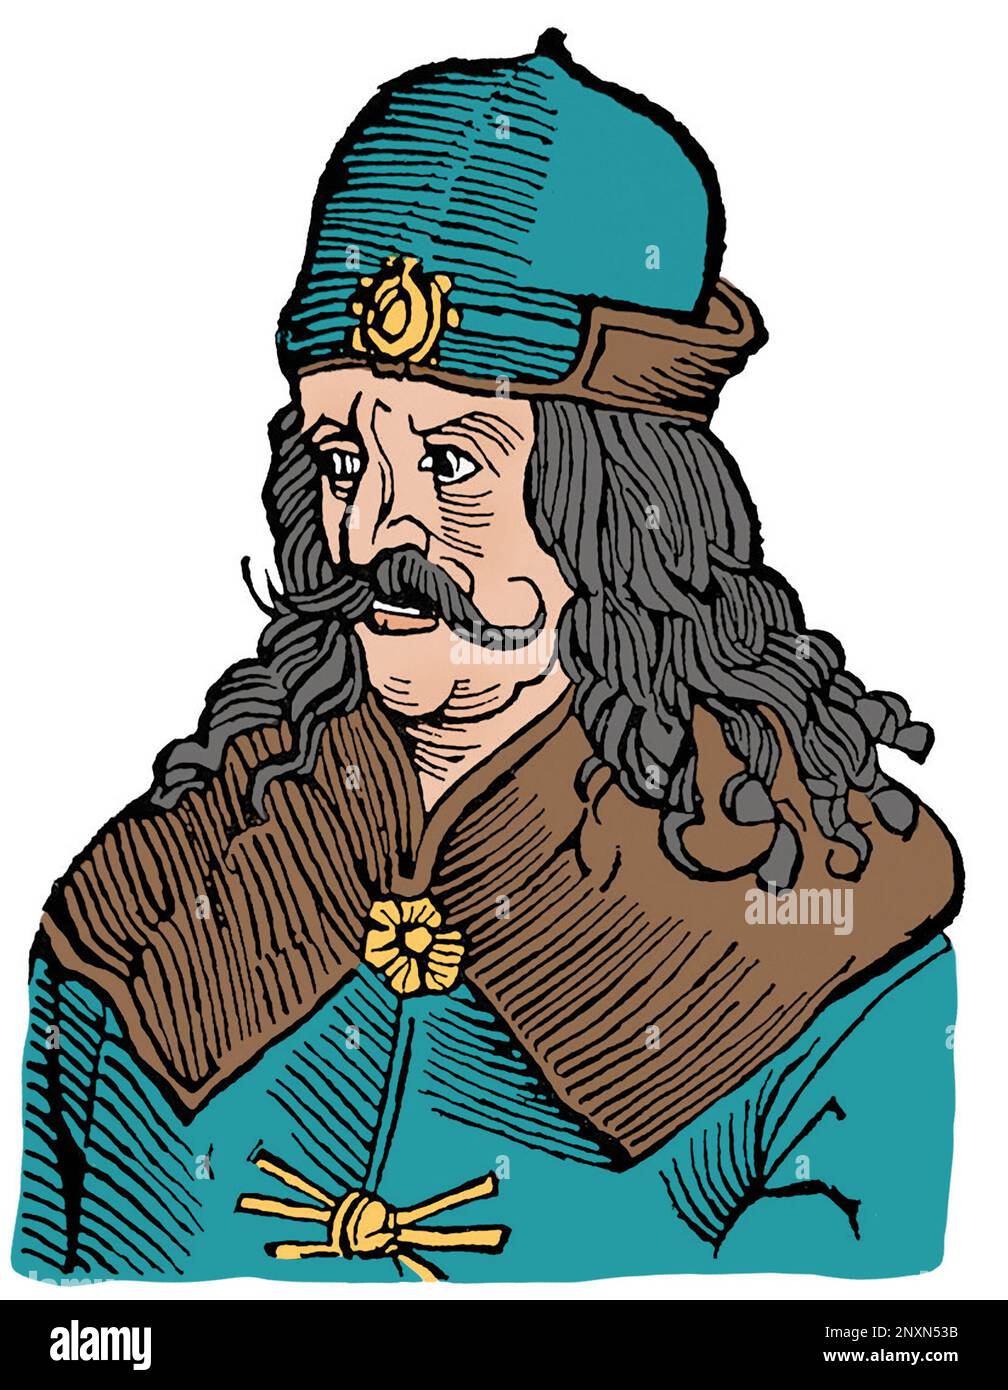 Vlad III, commonly known as Vlad the Impaler or Vlad Dracula (1428/31 ,Ai 1476/77), was Voivode of Wallachia three times. He is often considered one of the most important rulers in Wallachian history and a national hero of Romania. Notorious for his cruelty, his patronymic inspired the name of Bram Stoker's literary vampire, Count Dracula. Illustration after a 16th-century engraving. Colorized. Stock Photo